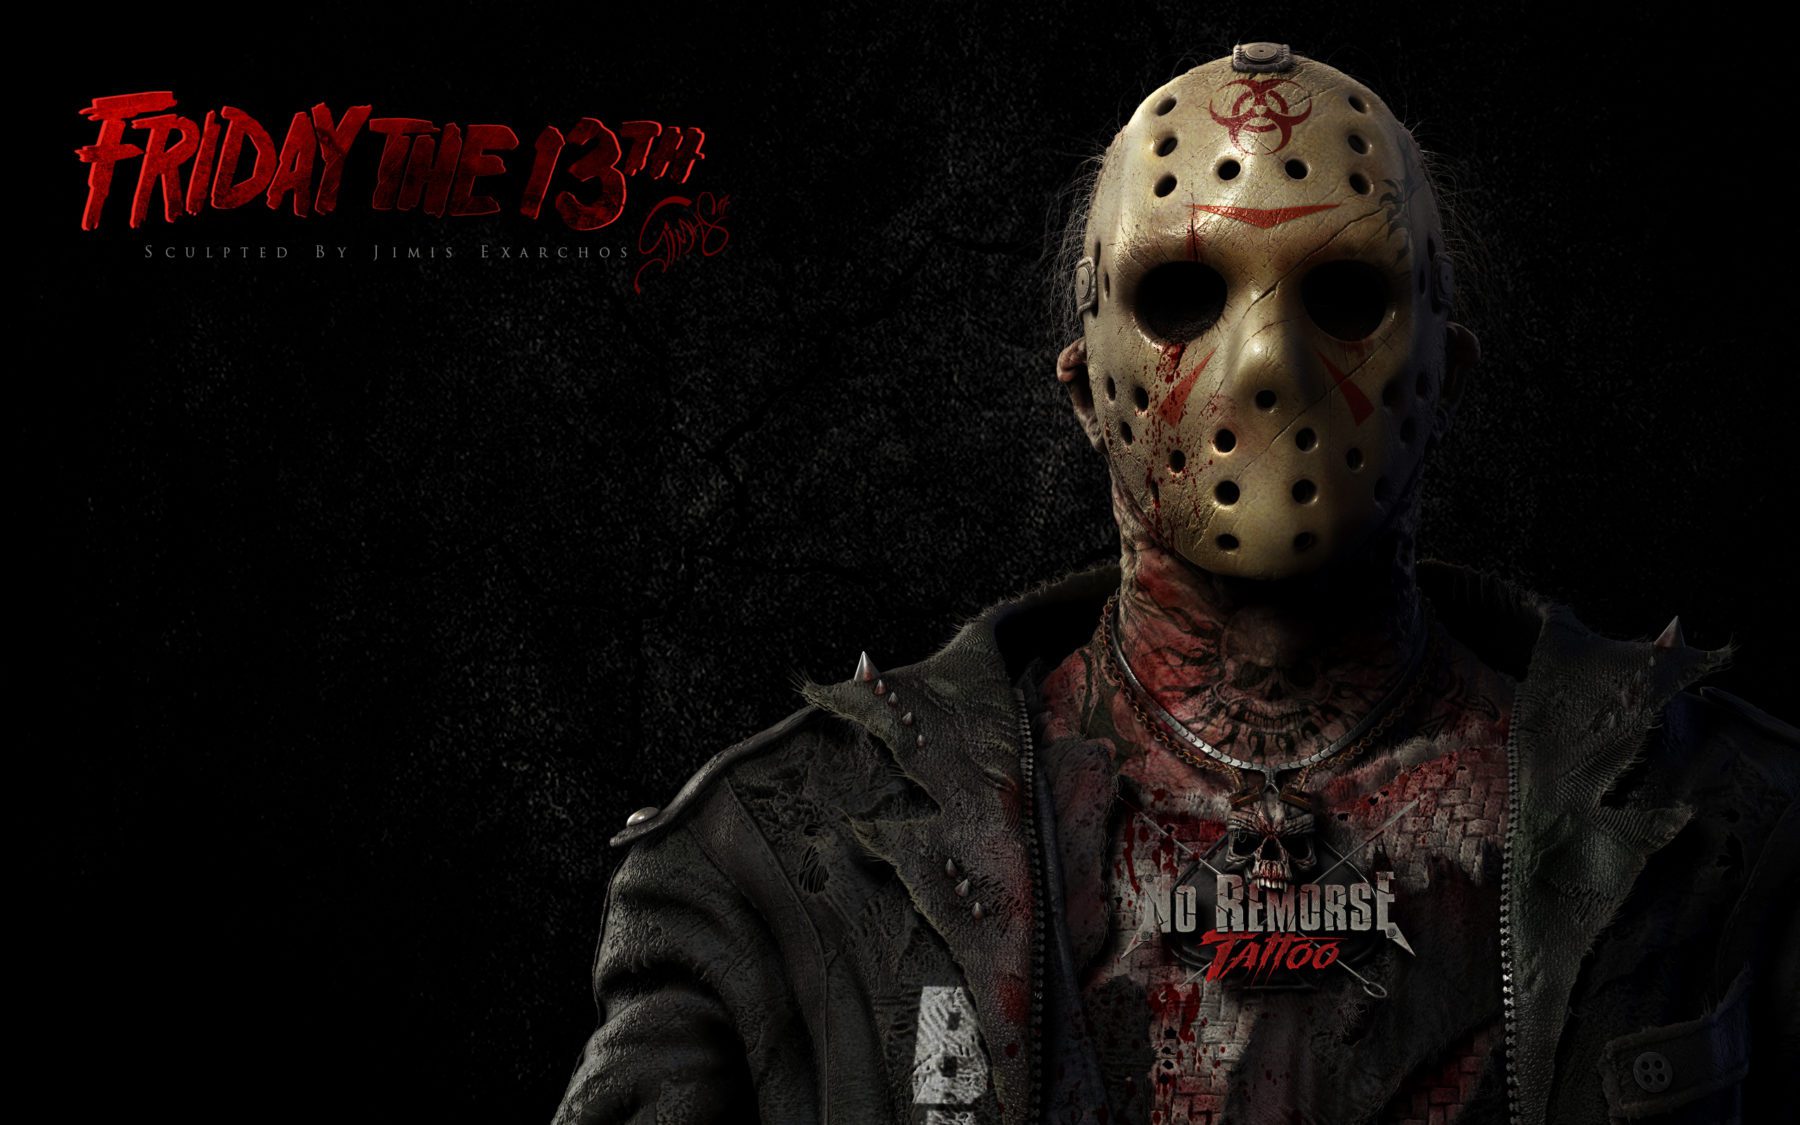 Jason Voorhees is the main character from the Friday the 13th series. 